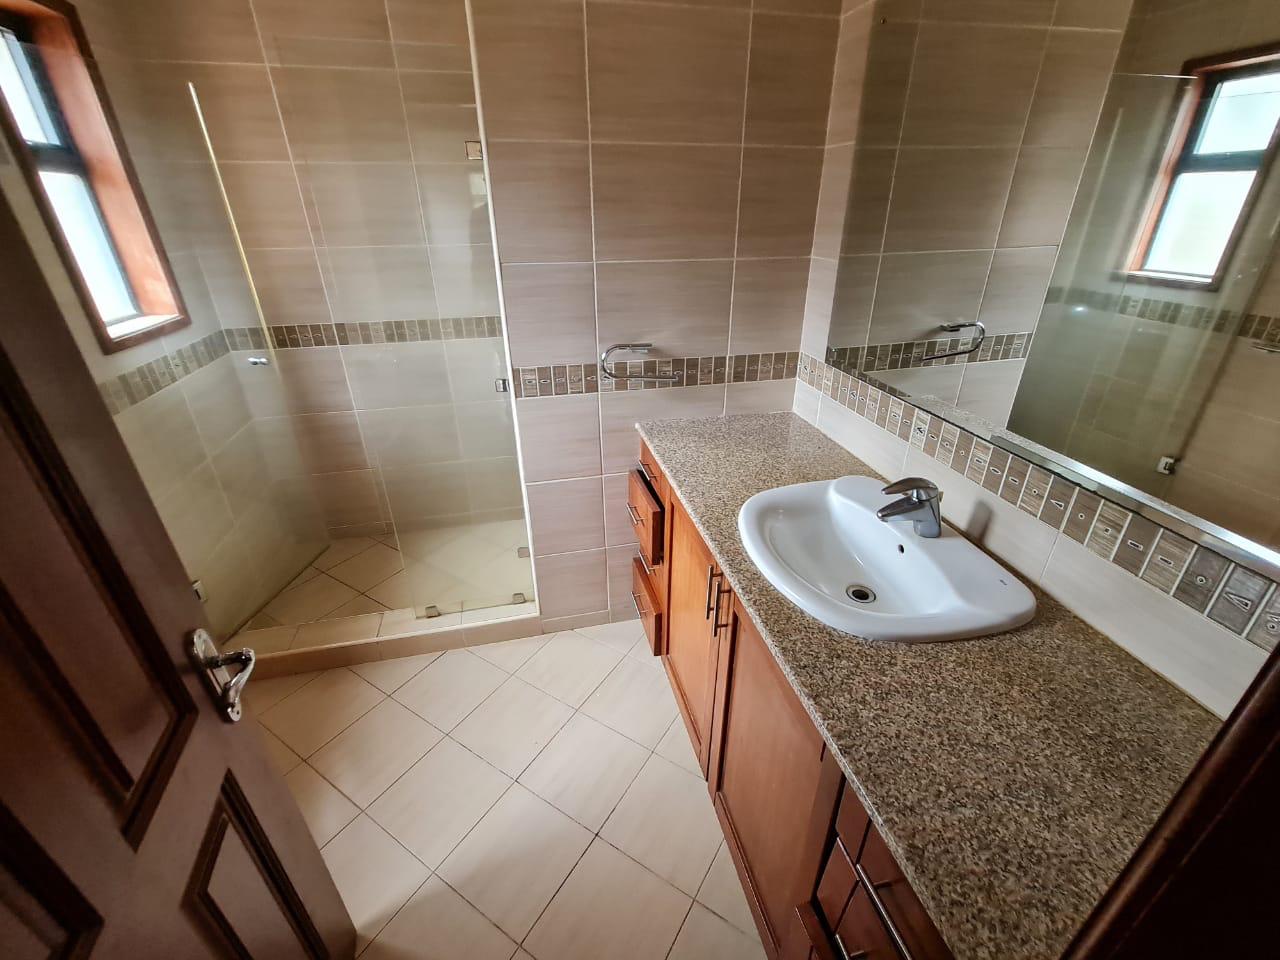 Lovely 4 bedroom Townhouse plus dsq for rent at Ksh330k in Westlands, ensuite, family room, office, detached dsq for 2, very well maintained and more amenities21